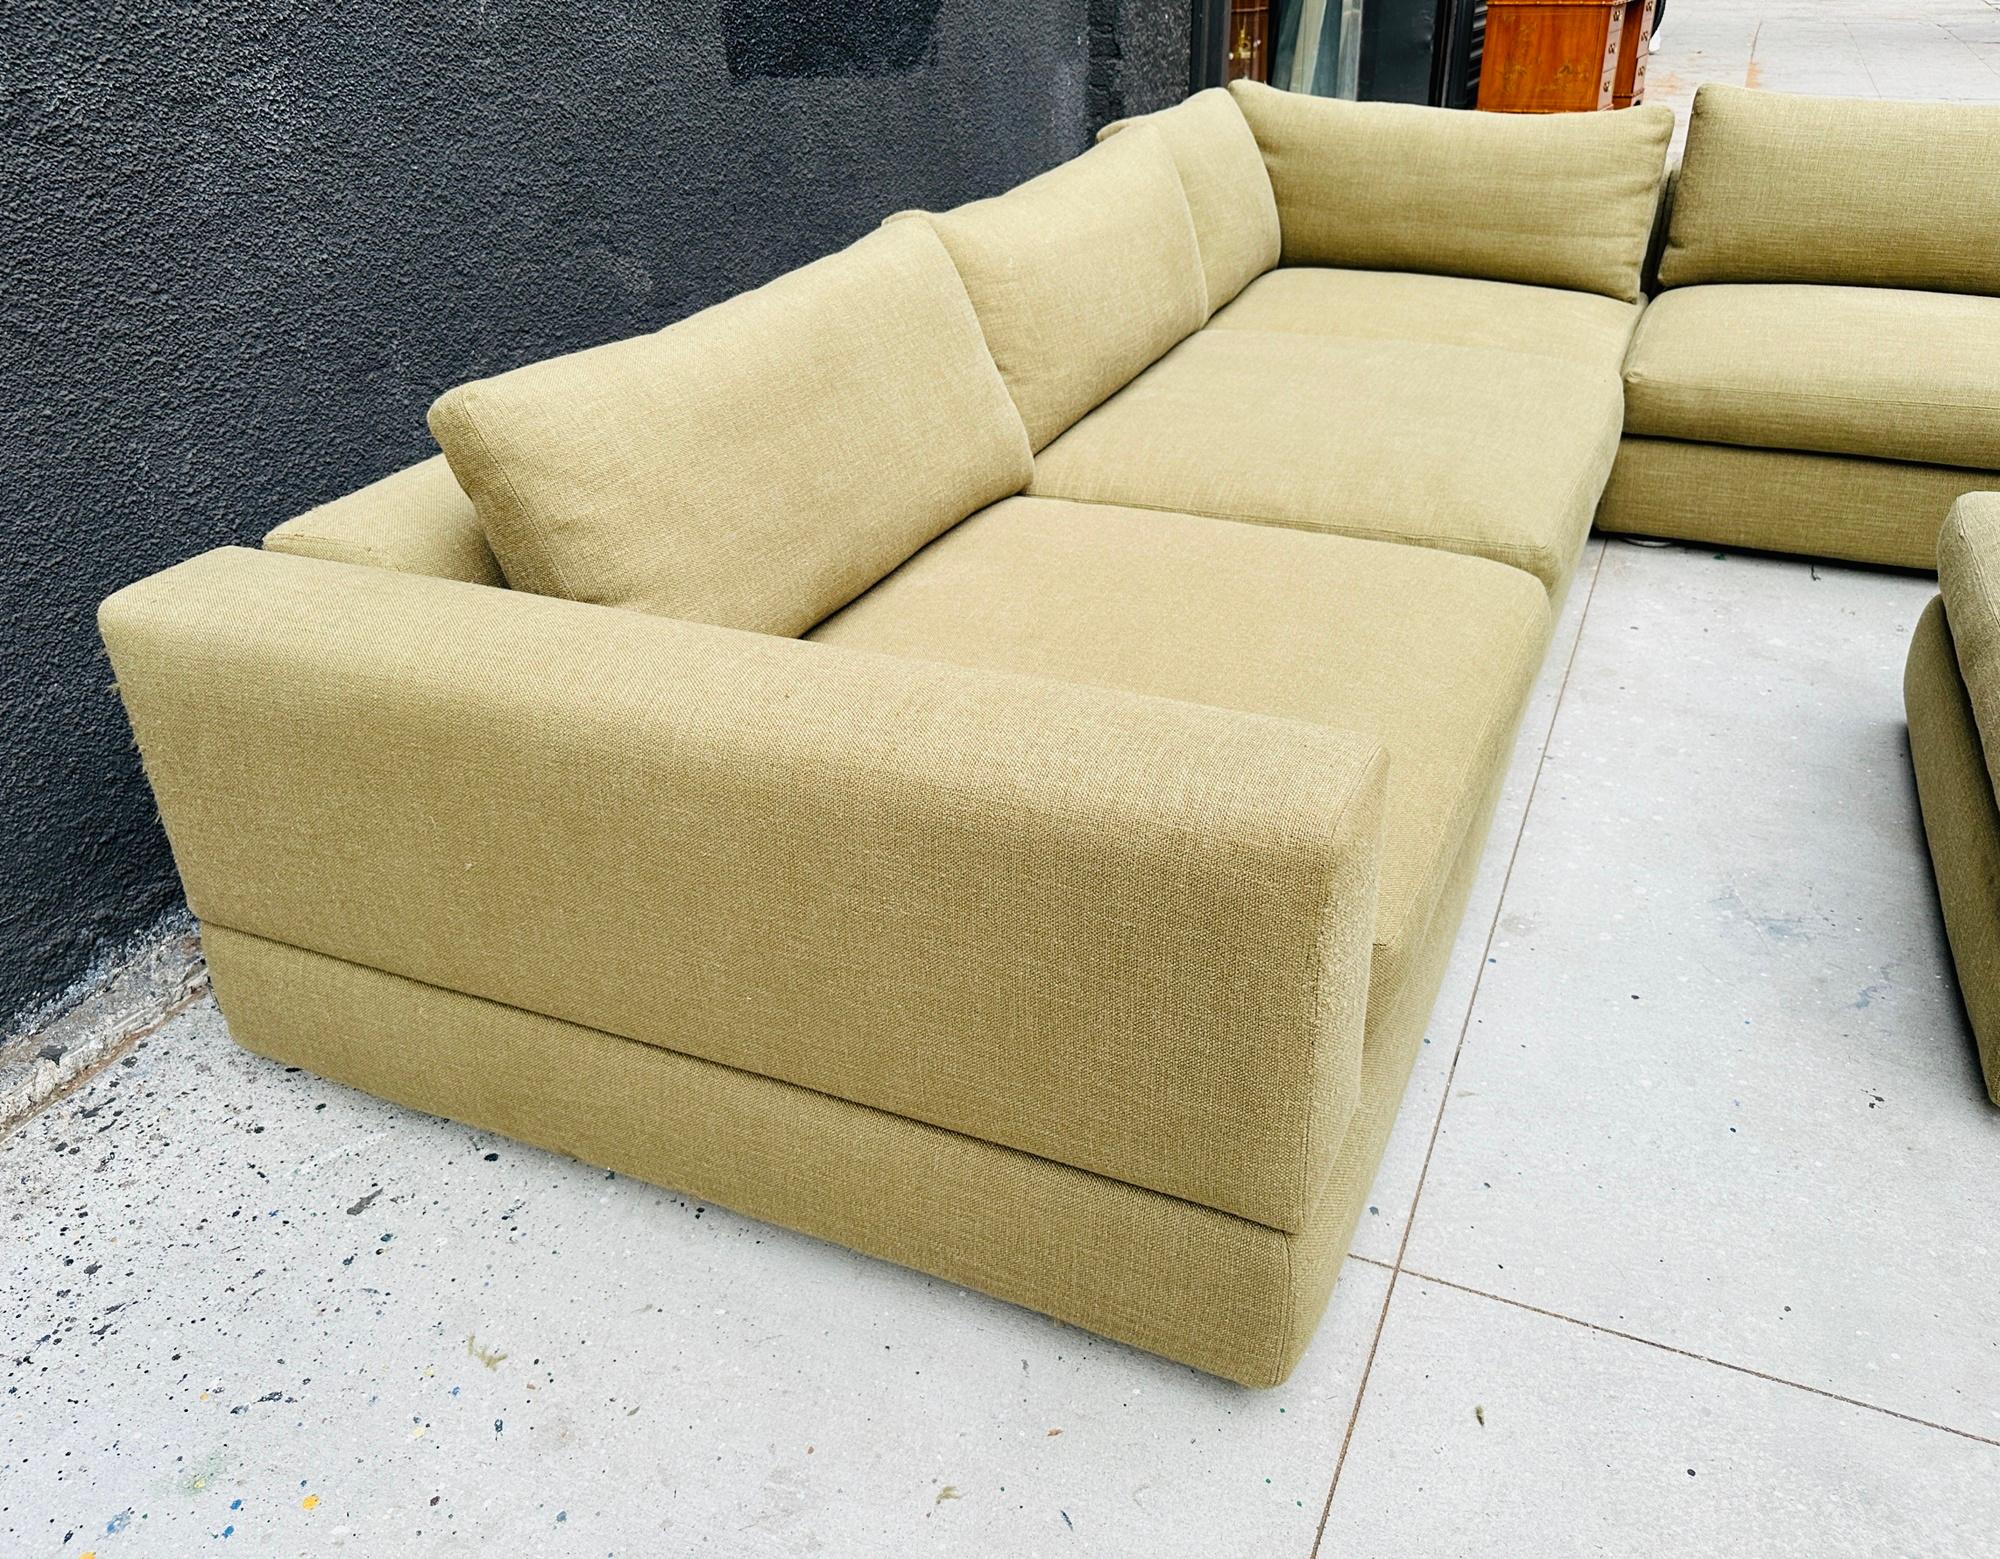 6 Piece Sectional Made in Italy by Rodolfo Dordoni for Minotti, Italy 2006 For Sale 5